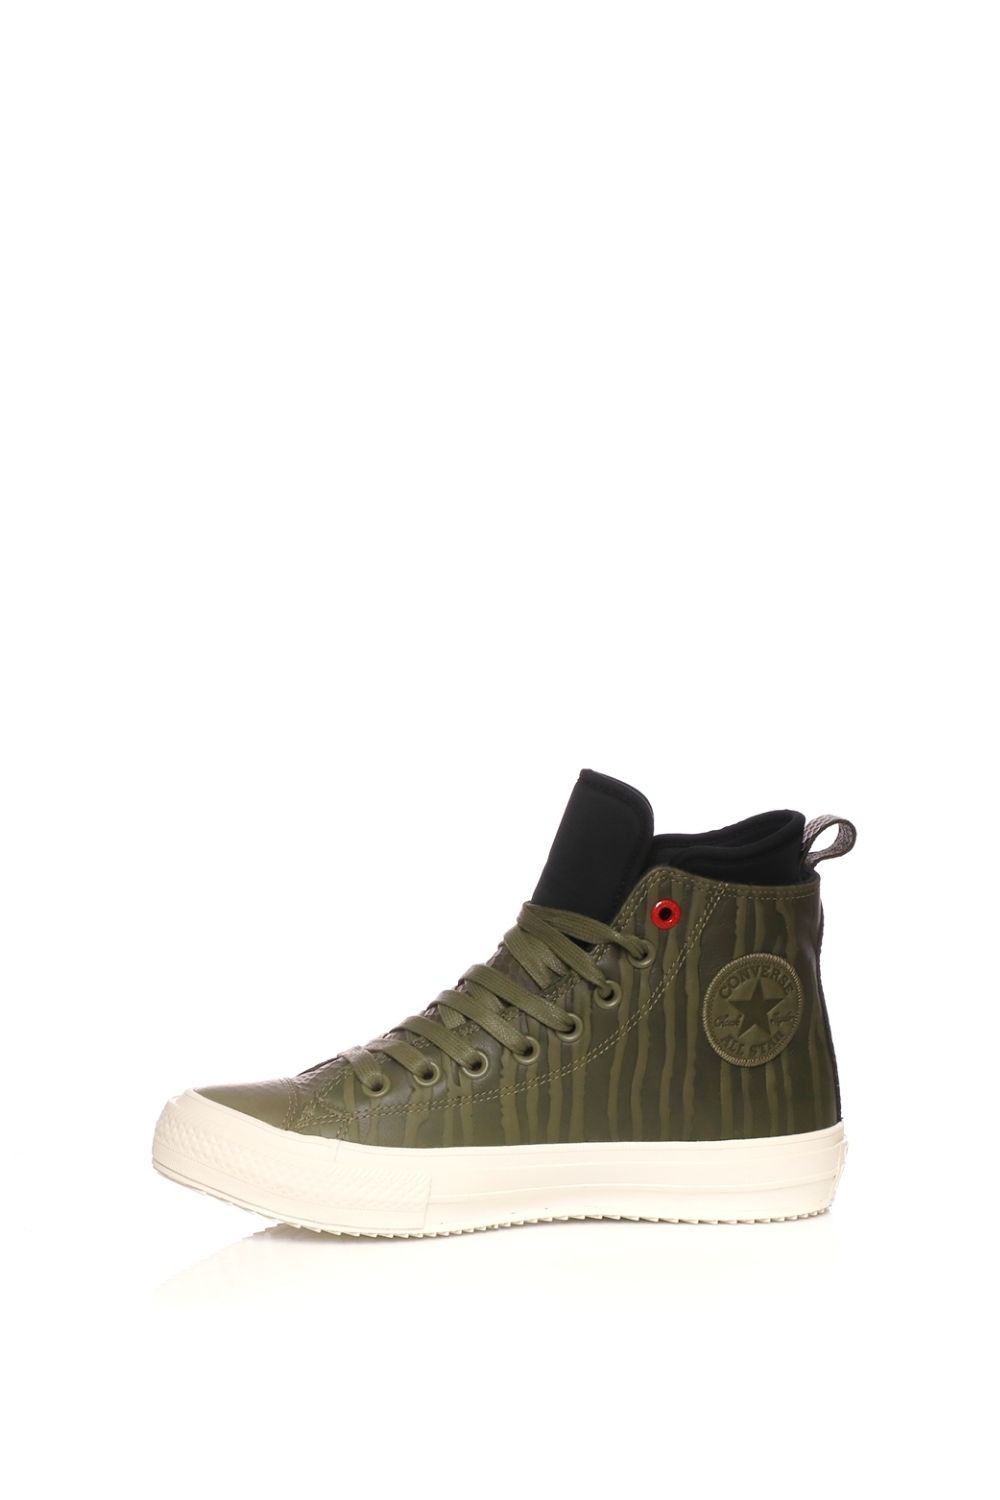 CONVERSE – Ανδρικα ψηλα sneakers CONVERSE Chuck Taylor AS WP Boot Hi χακι